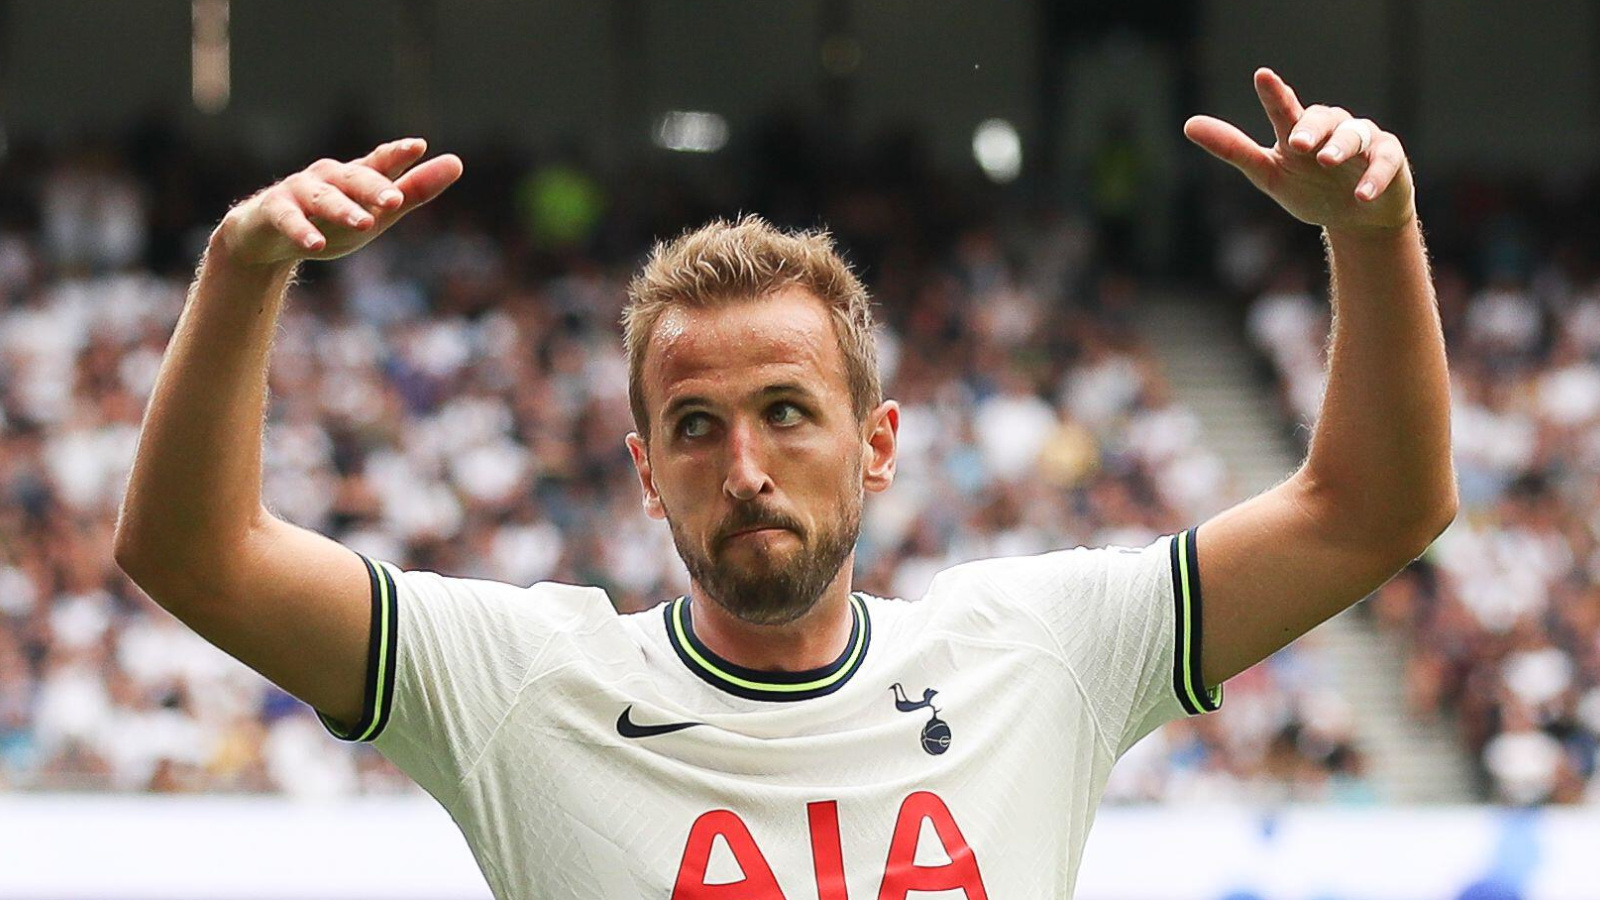 Kane Agrees to Move to Real Madrid